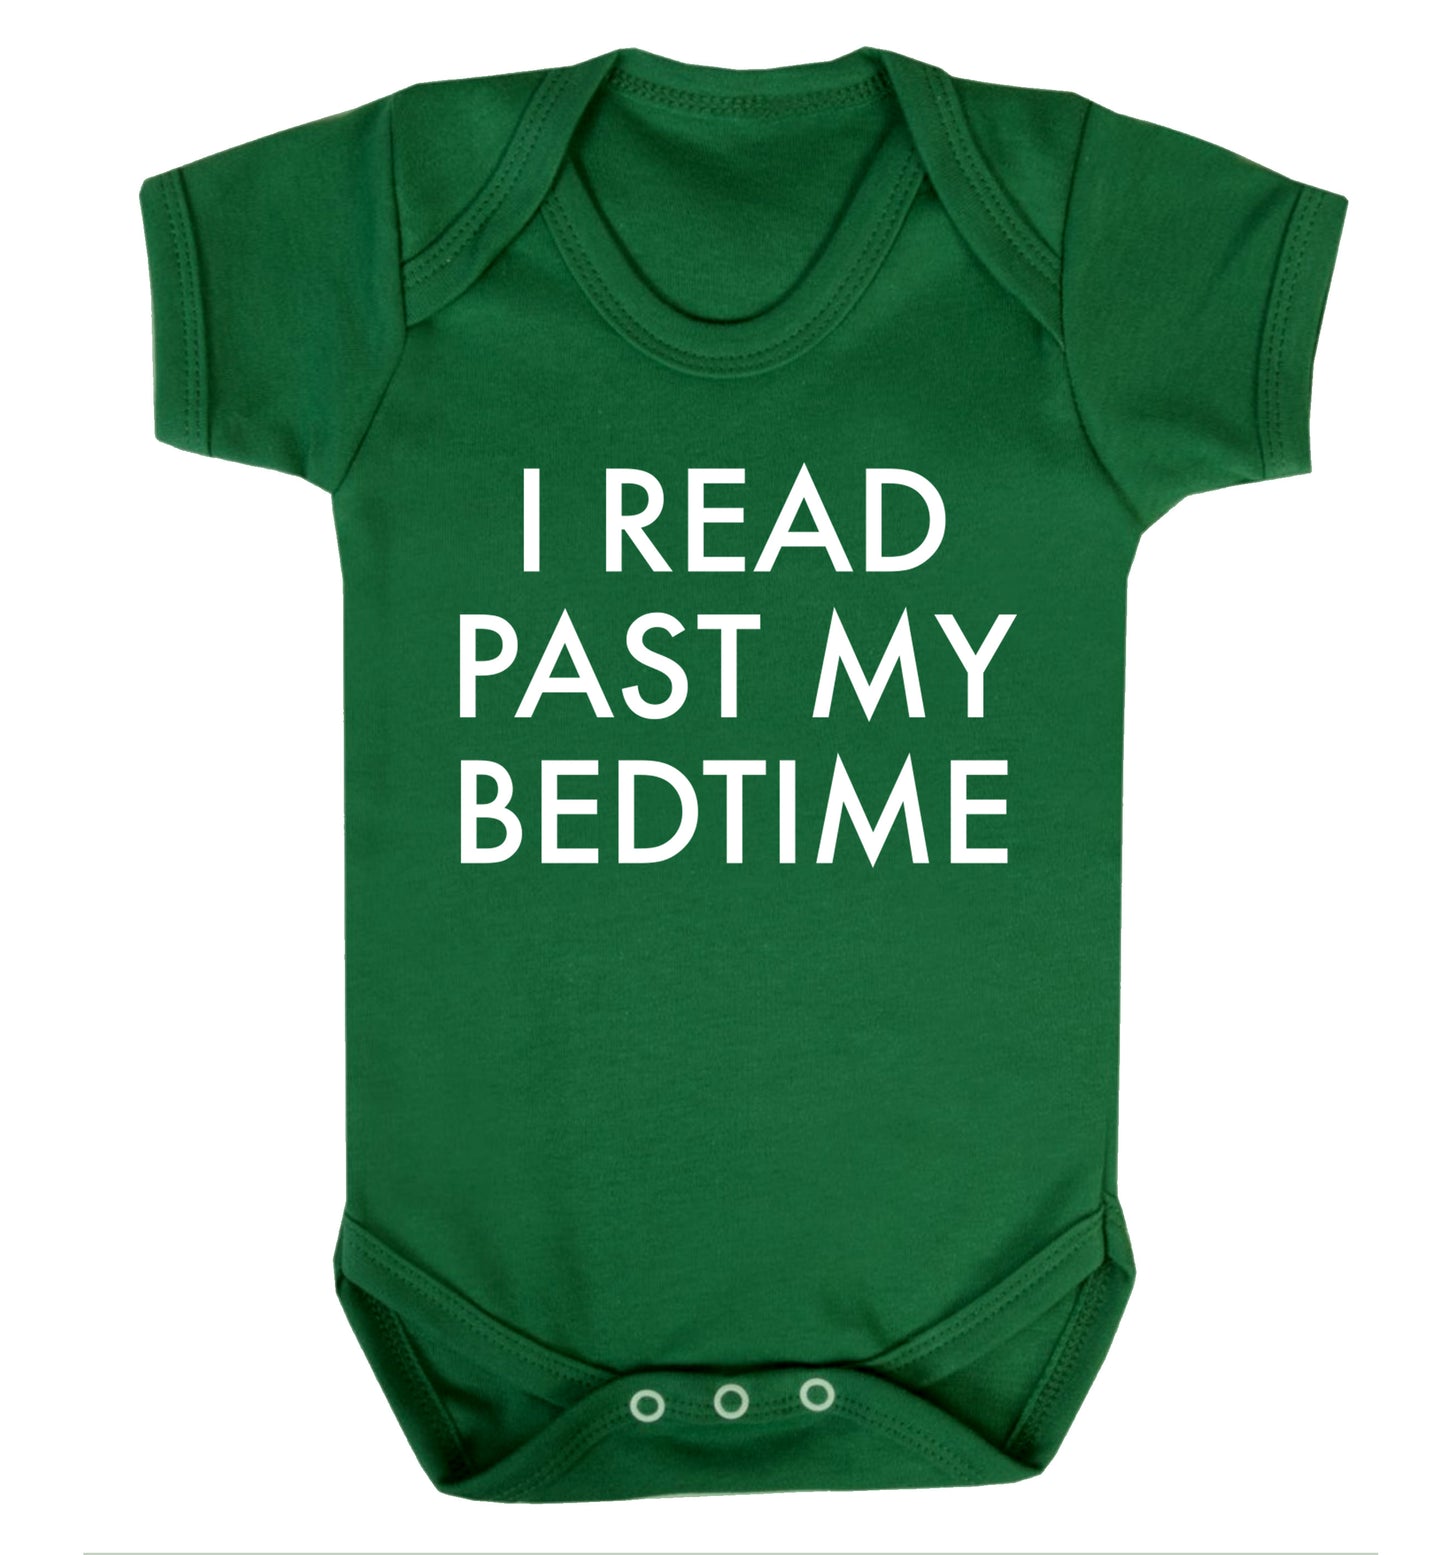 I read past my bedtime Baby Vest green 18-24 months